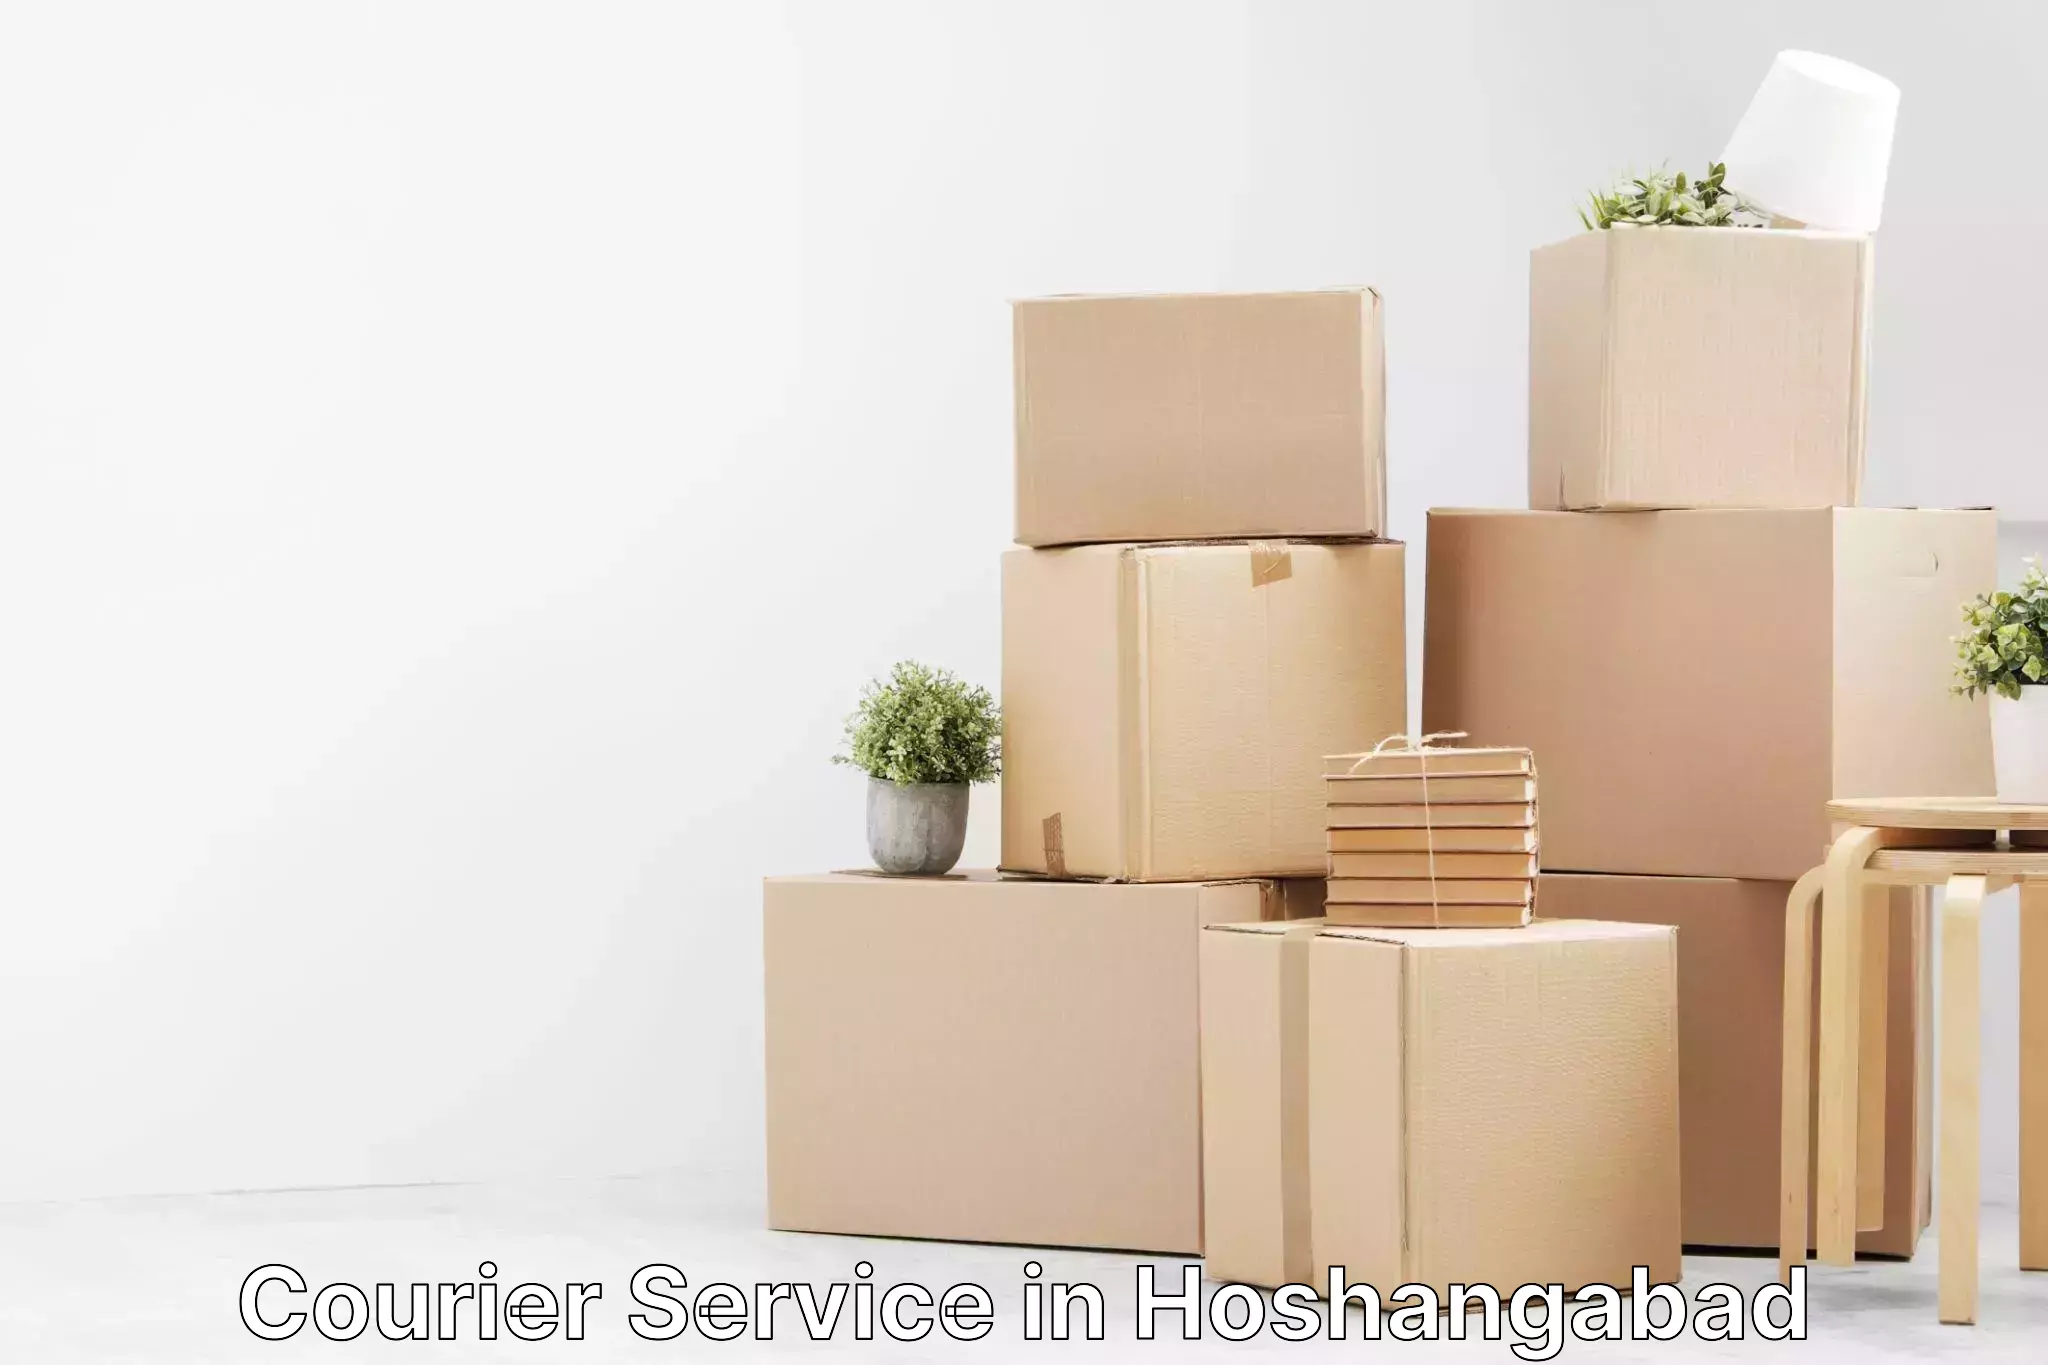 24/7 shipping services in Hoshangabad